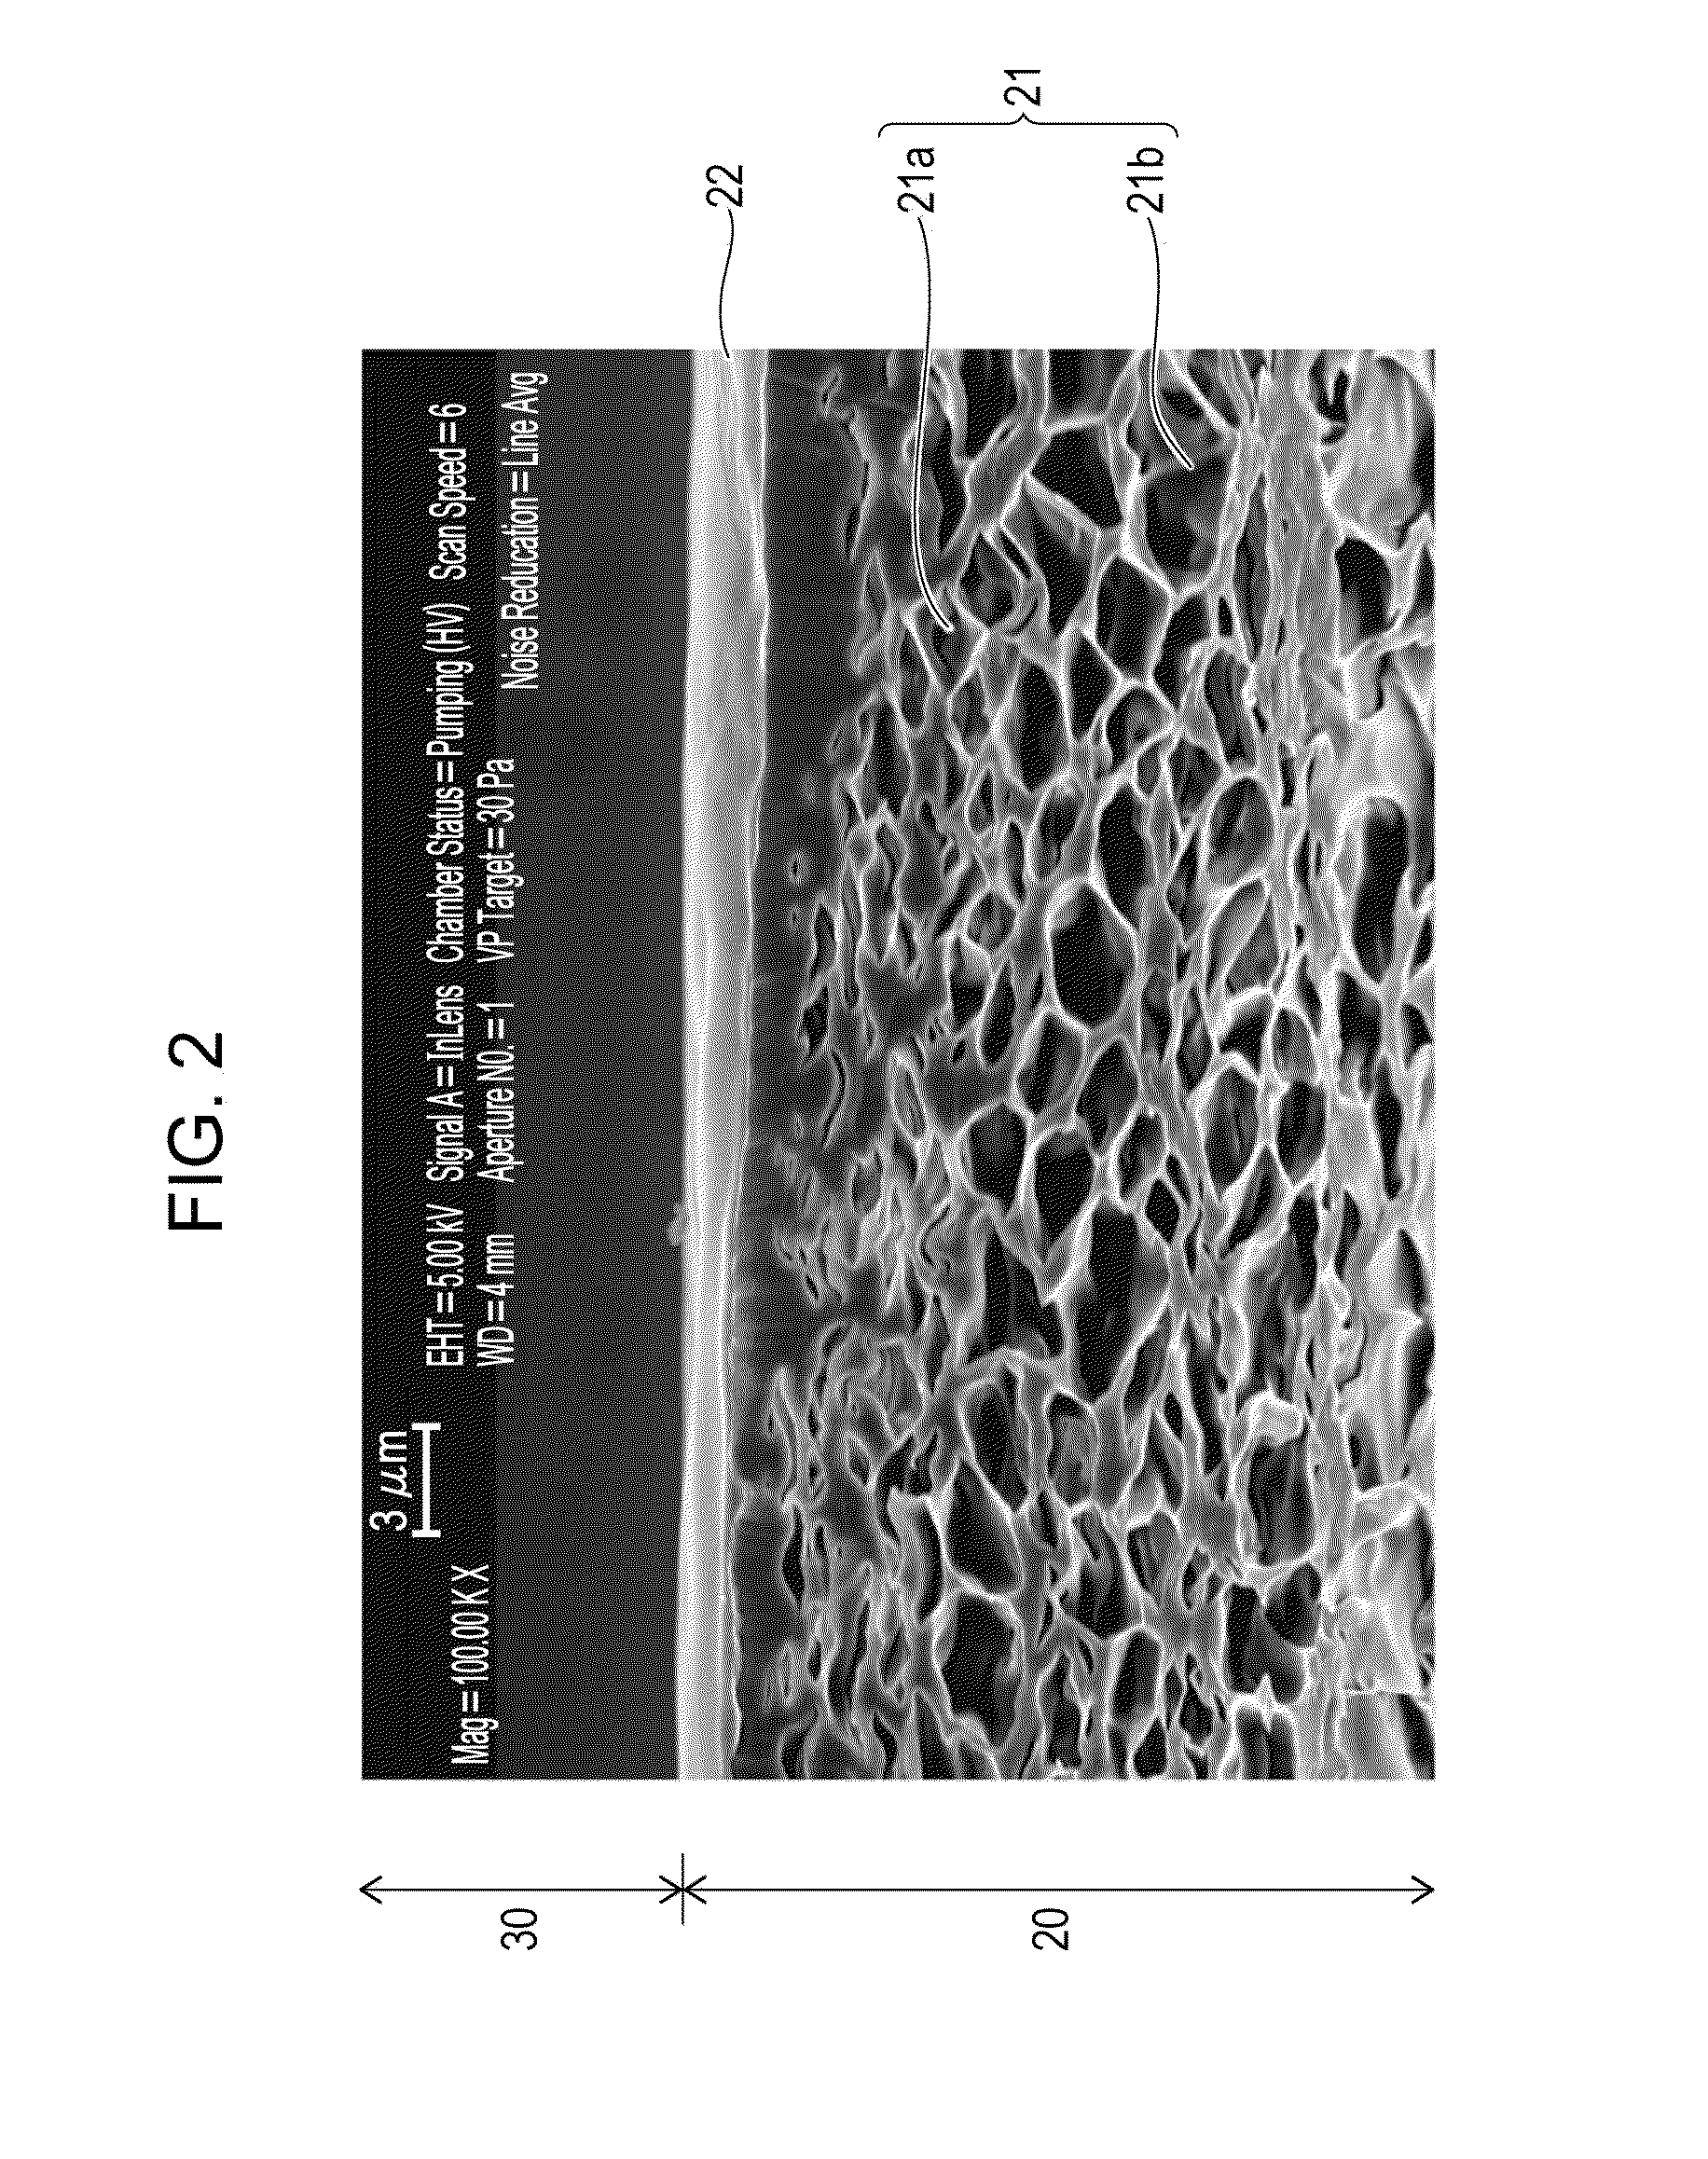 Laminated substrate, light-emitting device, and method for producing light-emitting device